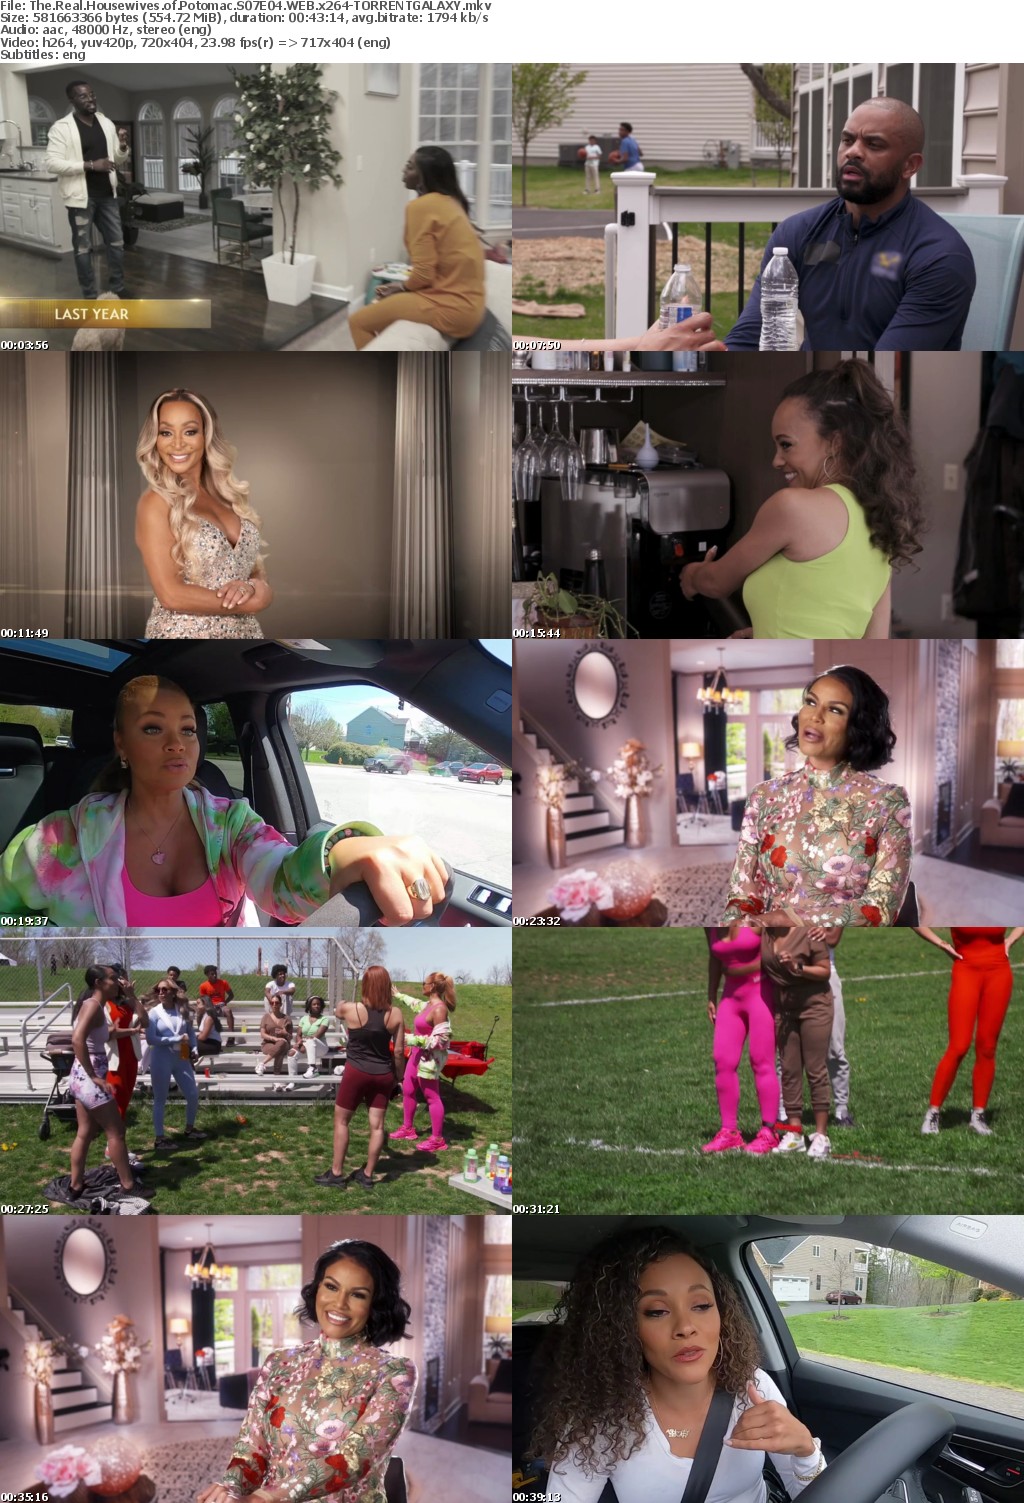 The Real Housewives of Potomac S07E04 WEB x264-GALAXY